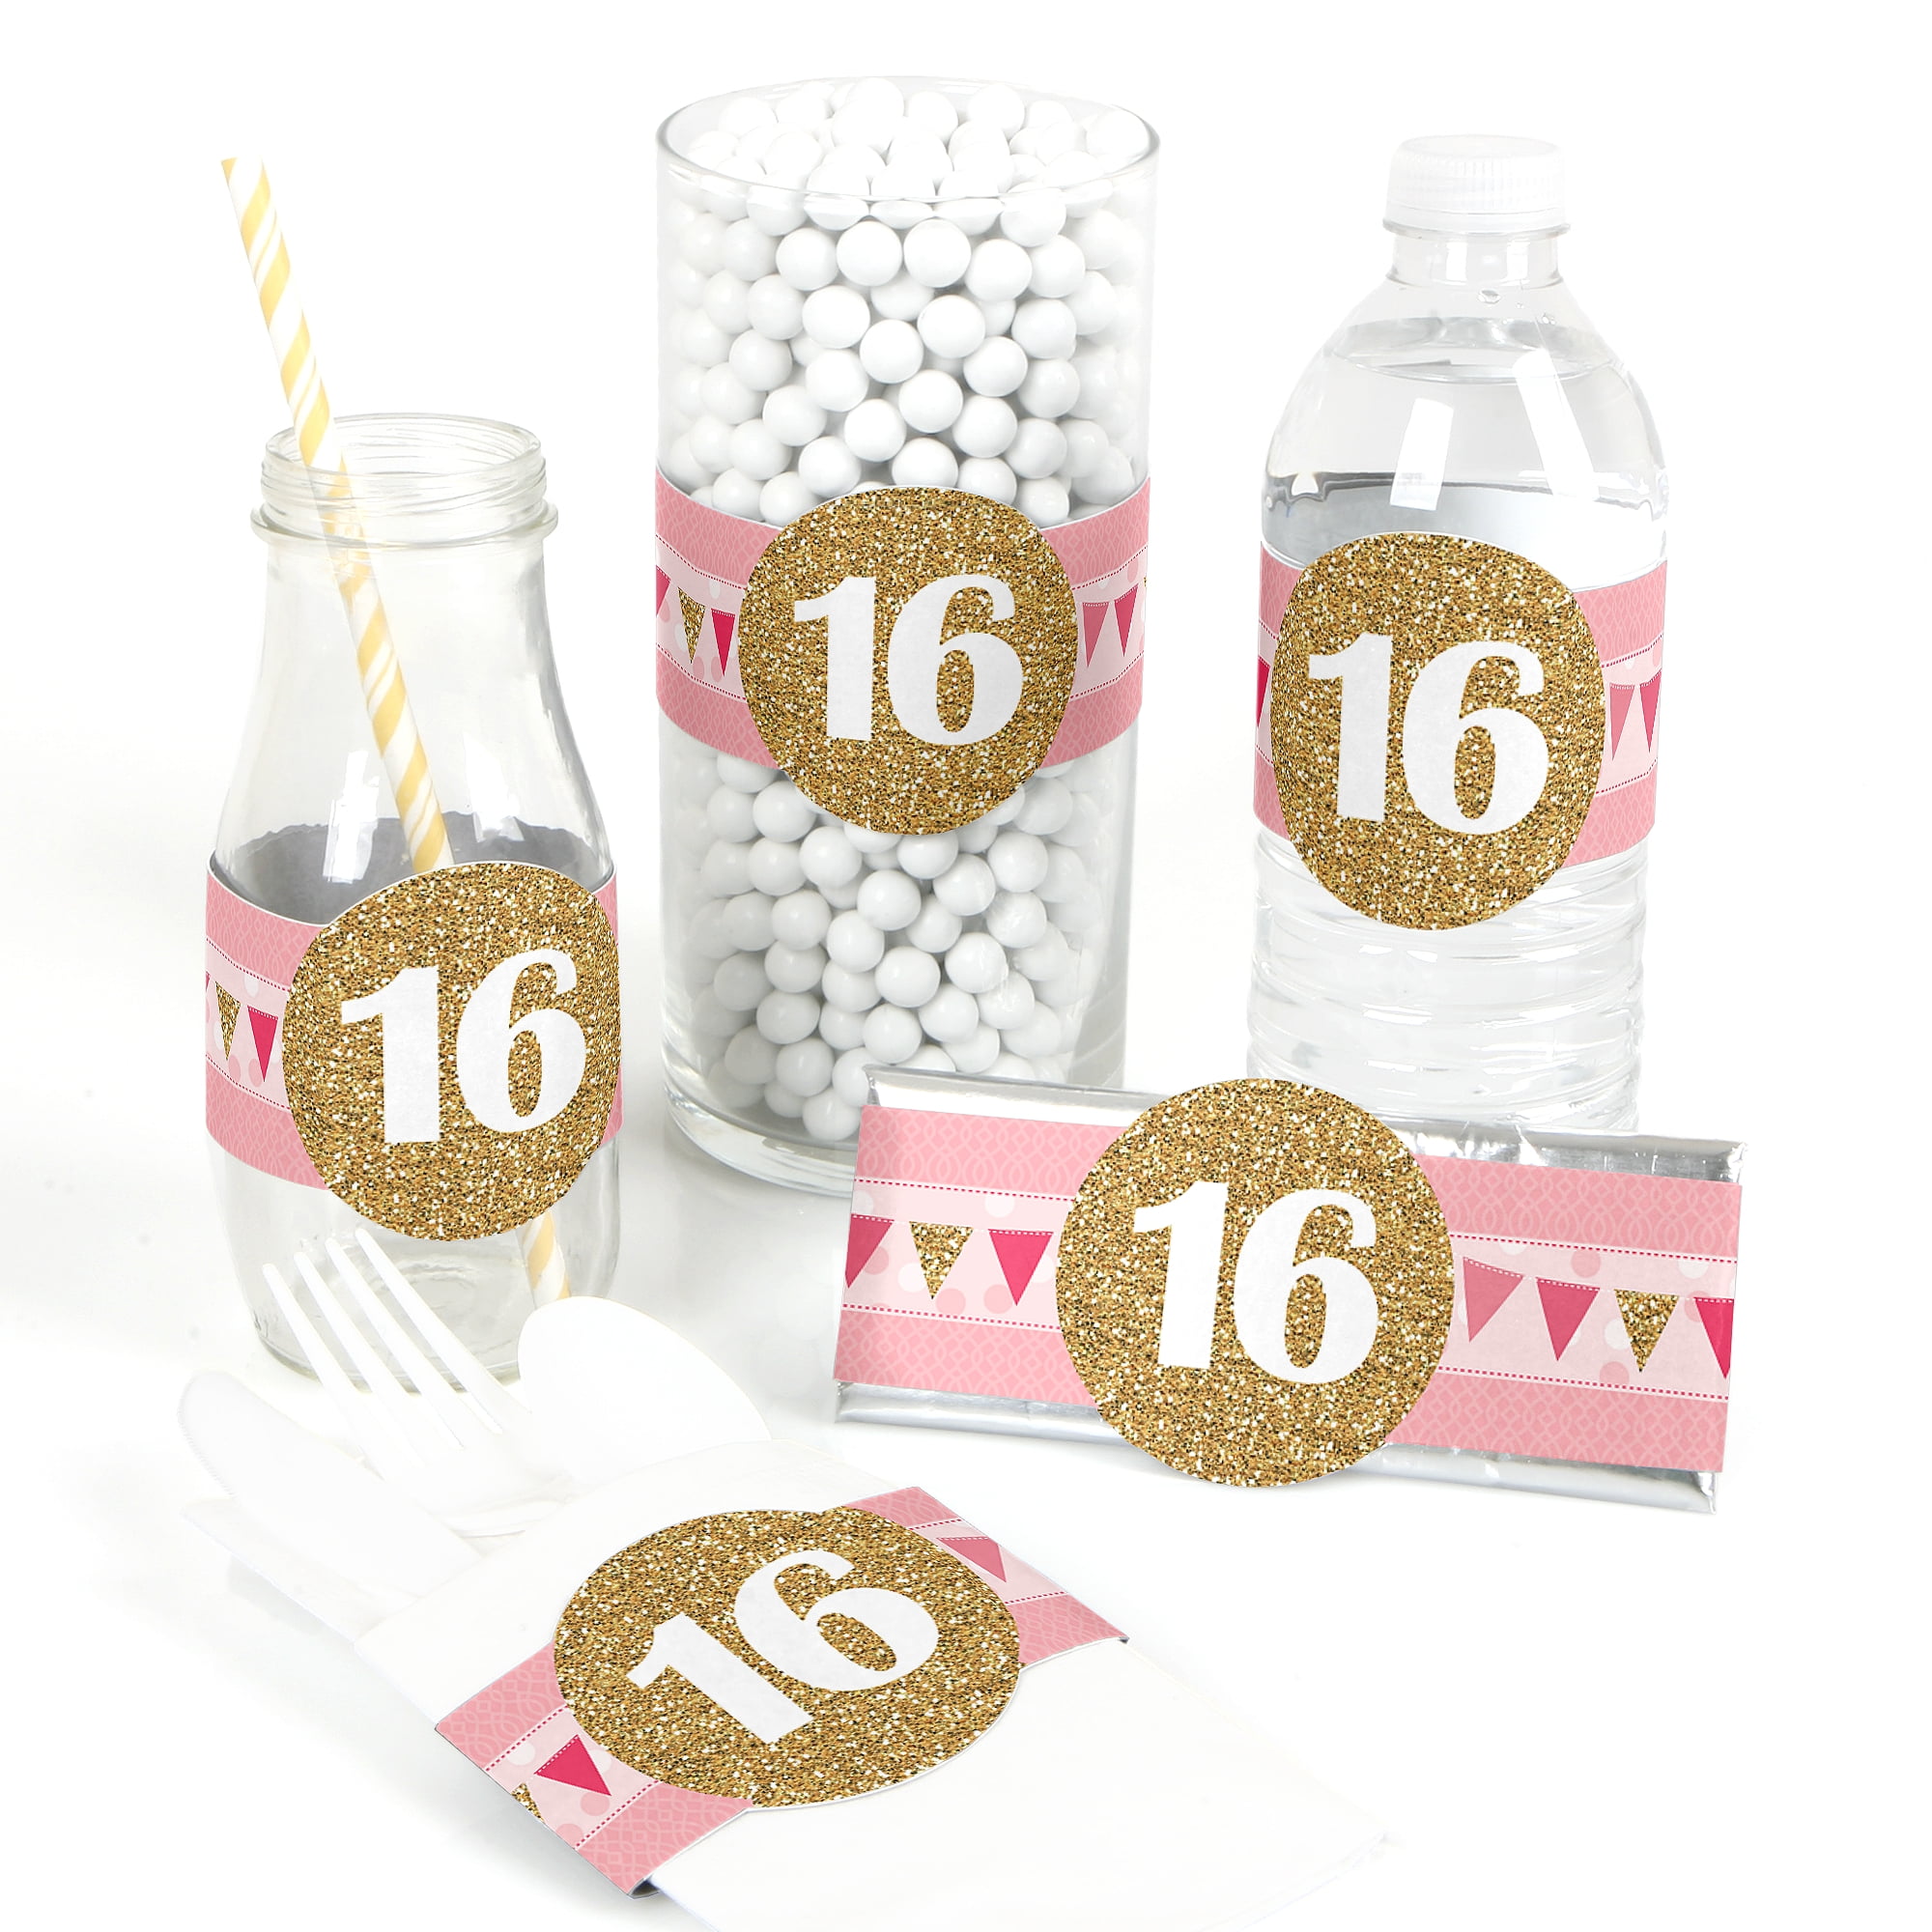 Mini Paint Cans Favors Goodie Treats Containers 1st Birthday Sweet 16th Quinceanera 25th 30th 40th 50th 60th Graduation Party Supplies